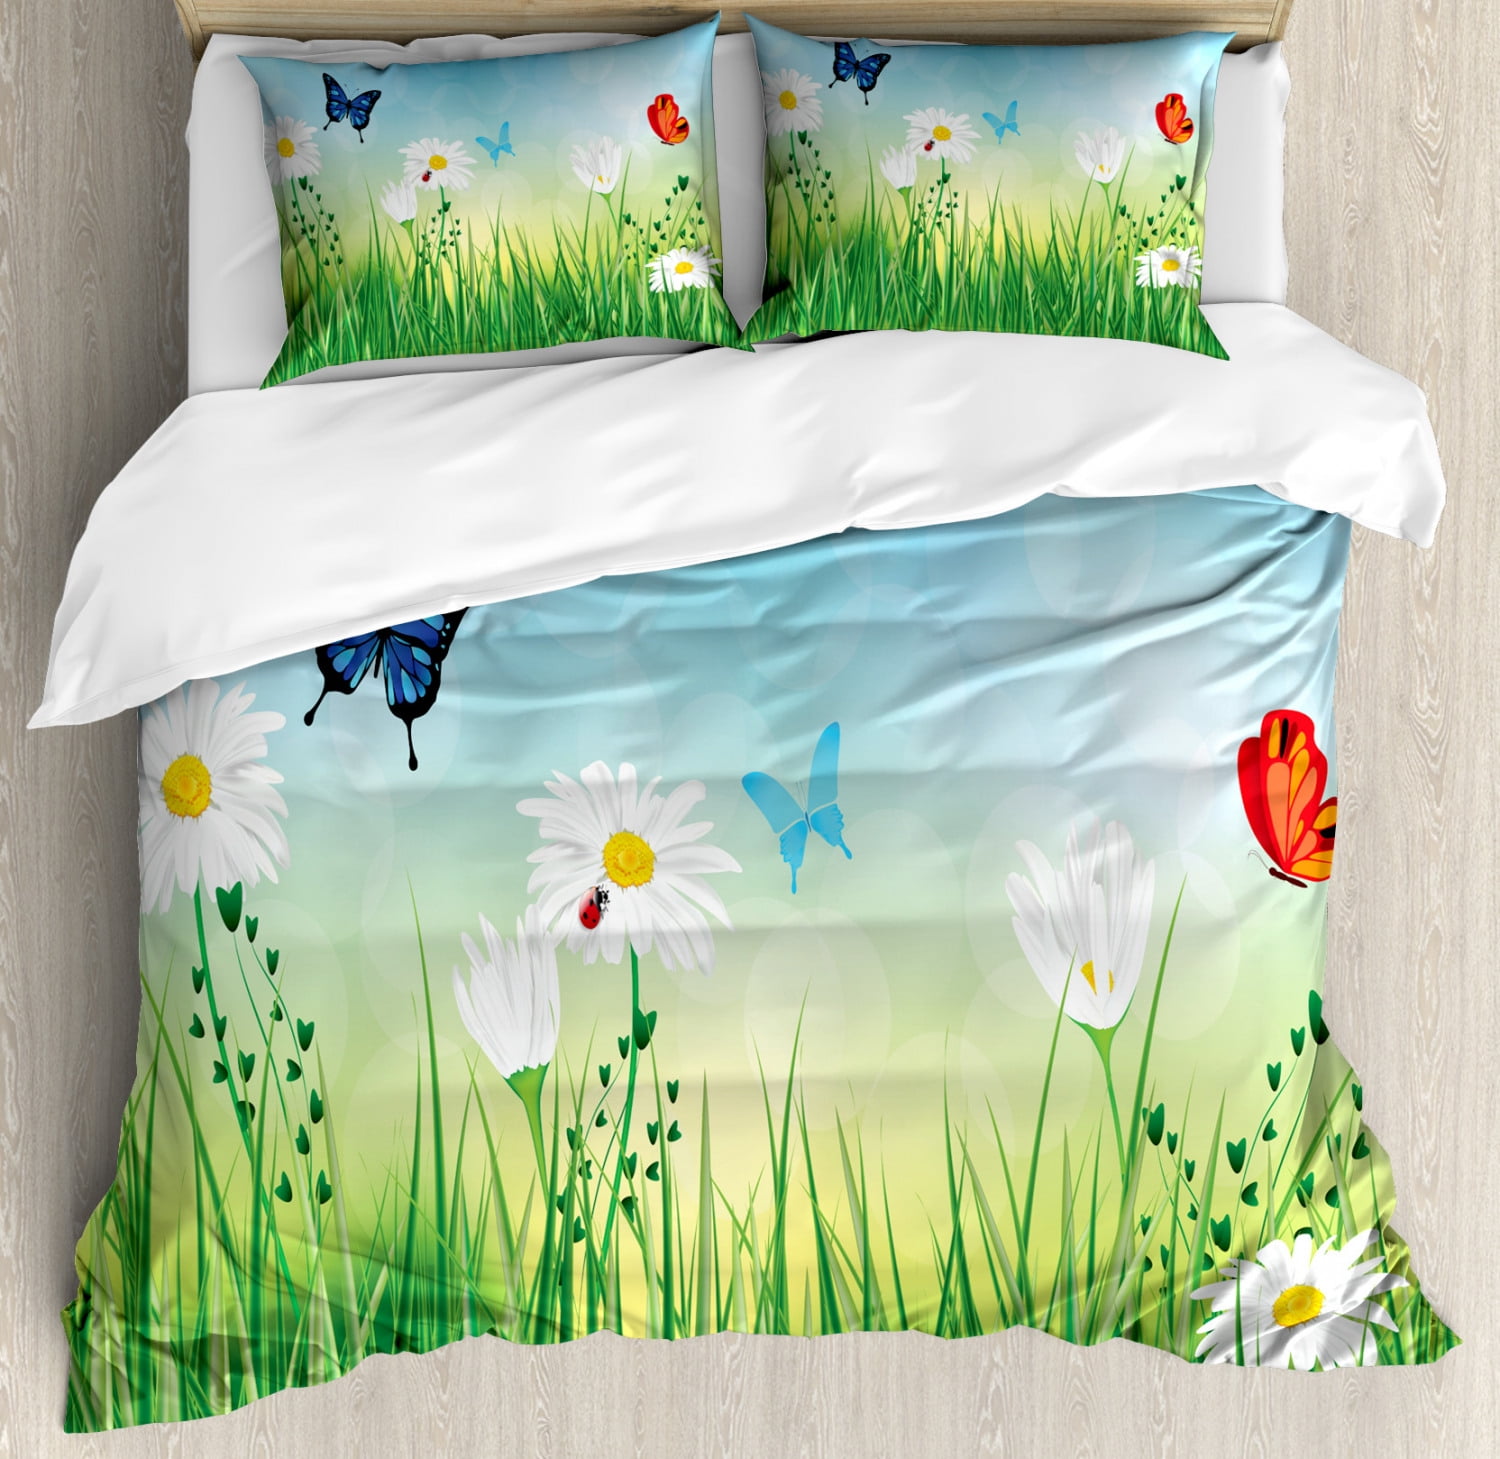 Summer Duvet Cover Set King Size Meadow Illustration With Daisies